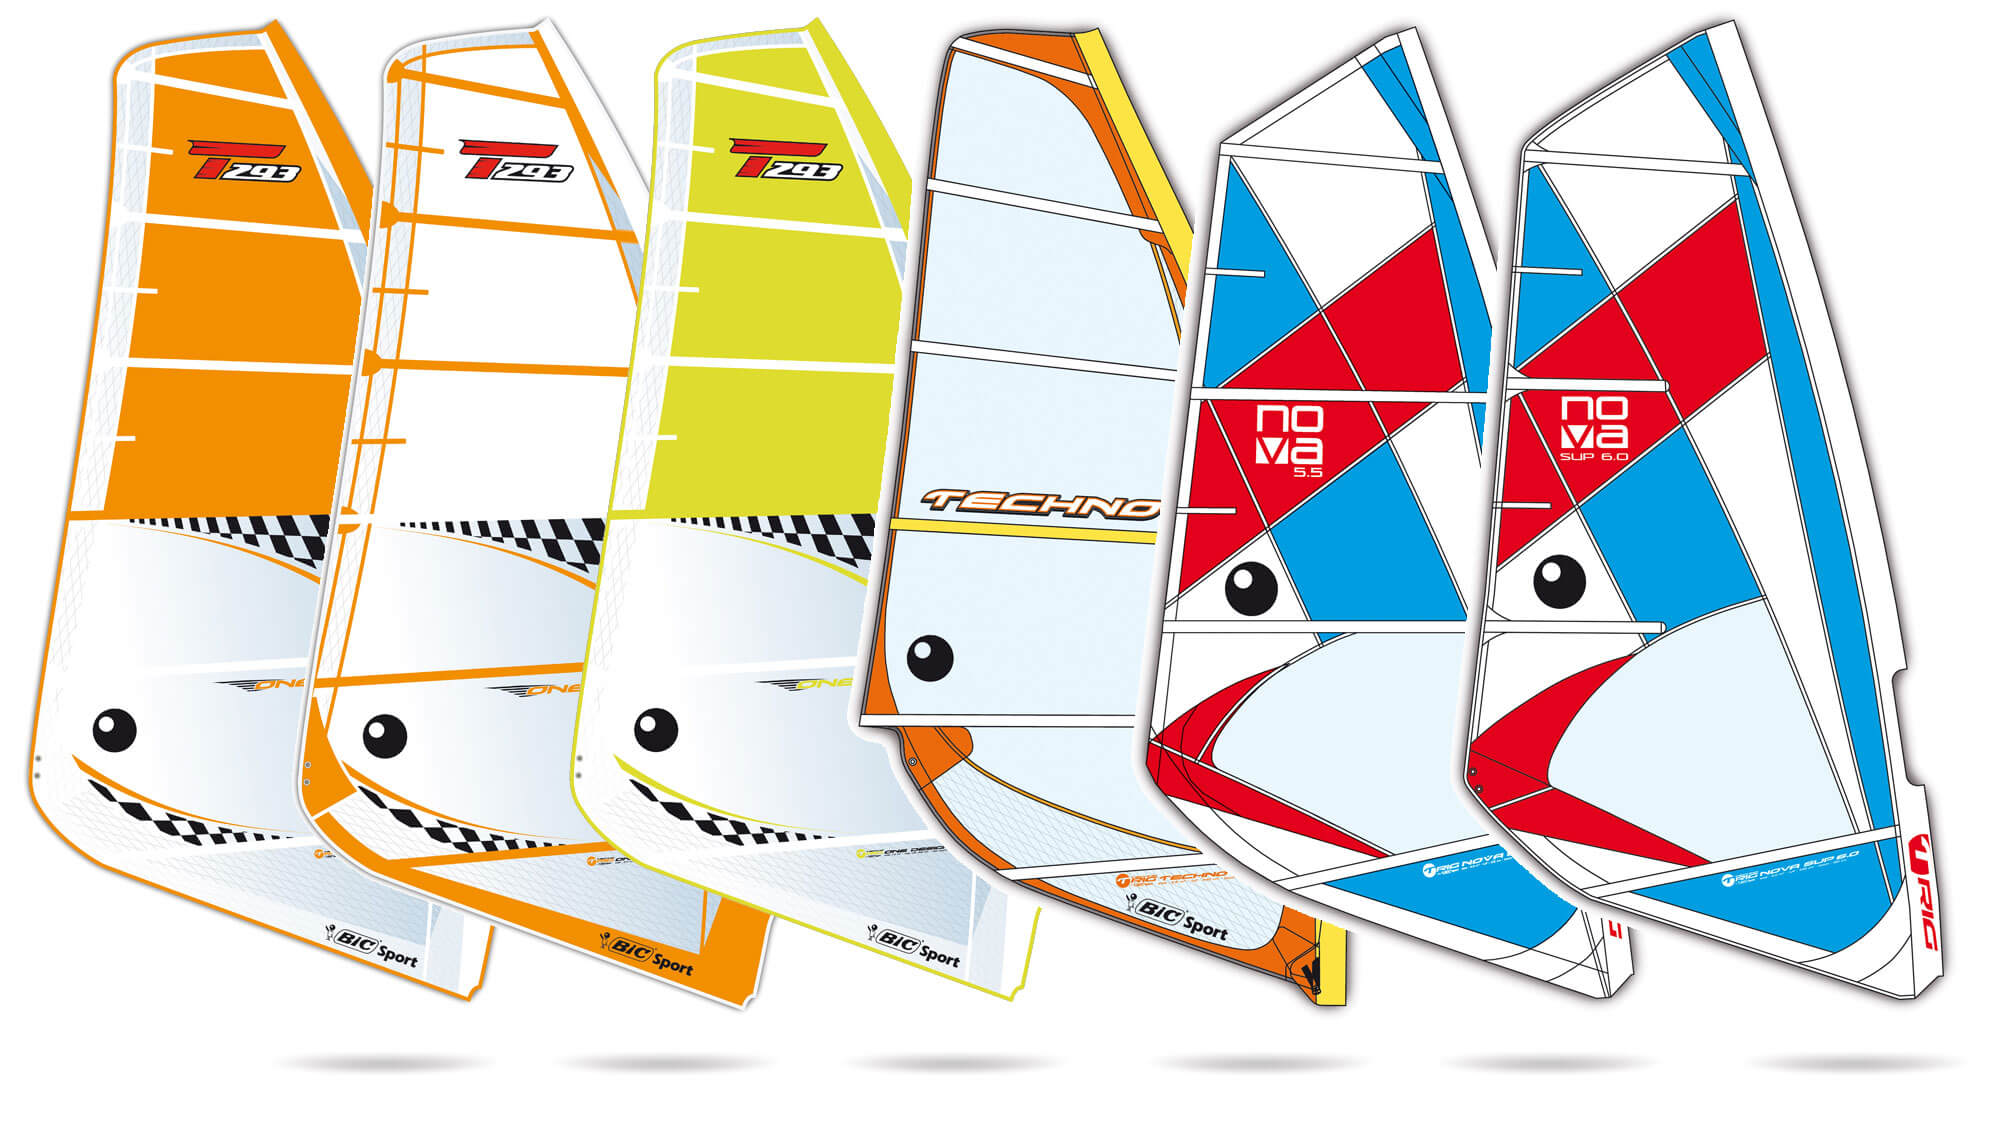 Manufacturer and sale of sailboards for windsurfing